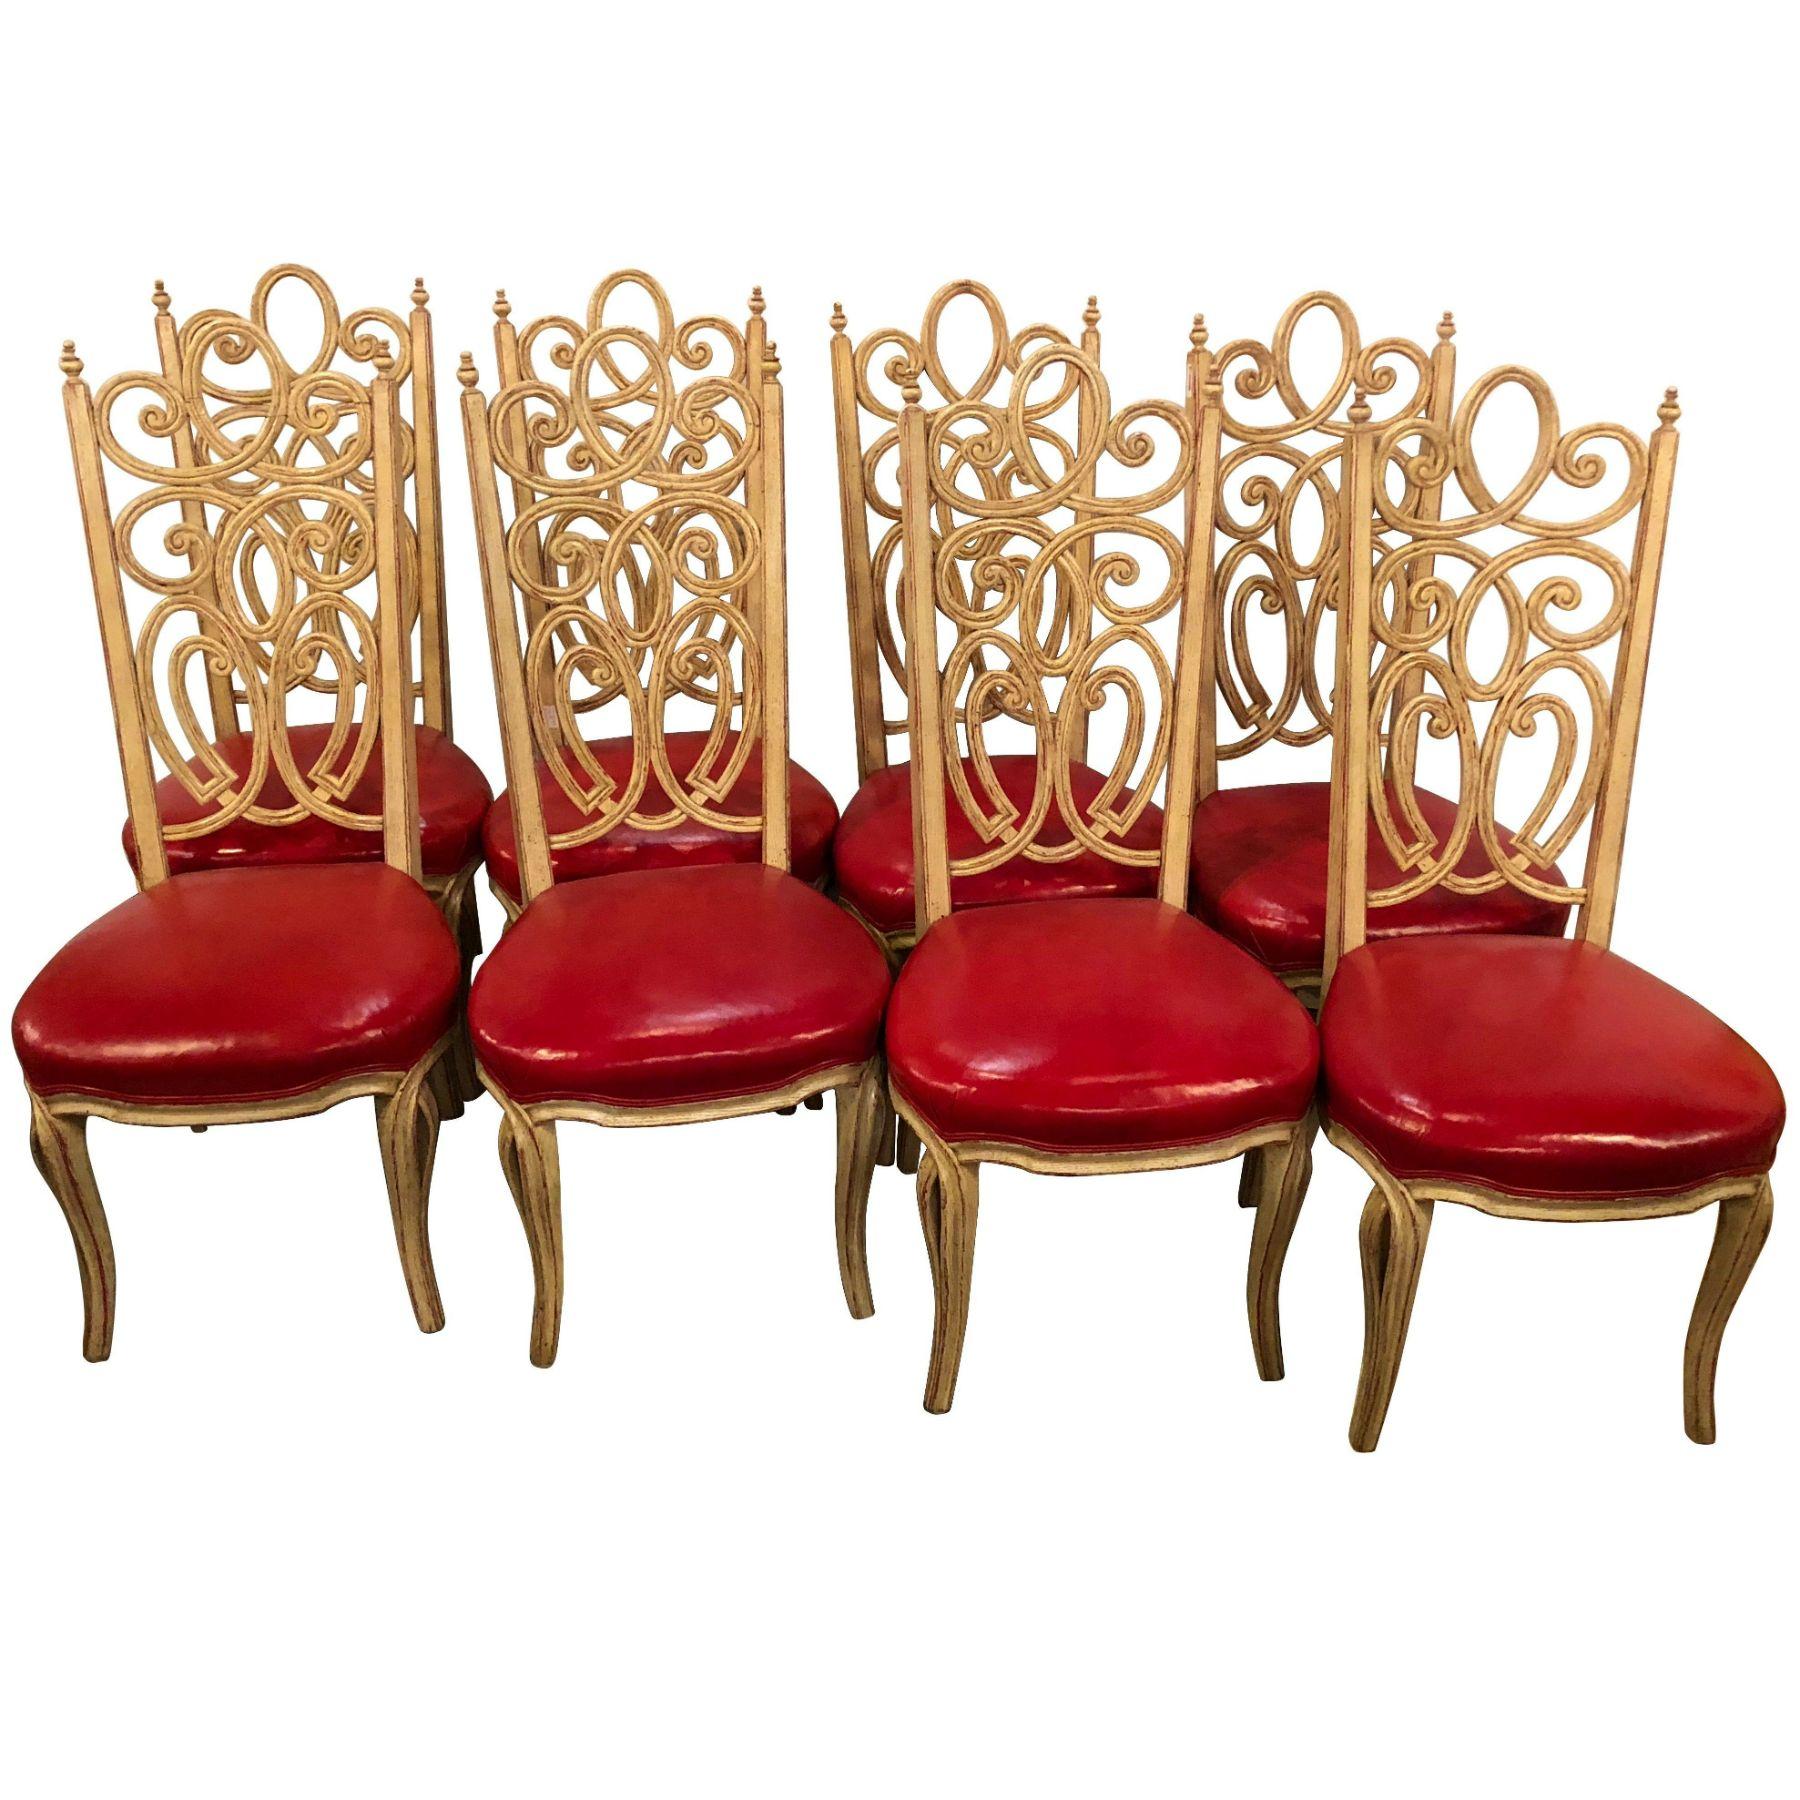 A fine set of eight Louis Pistono white distressed dining chairs. Each having a carved ribbon back with red under paint on a distressed off-white frame. This Fine set by the highly sought after furniture maker Louis Pistono (French/Canadian,